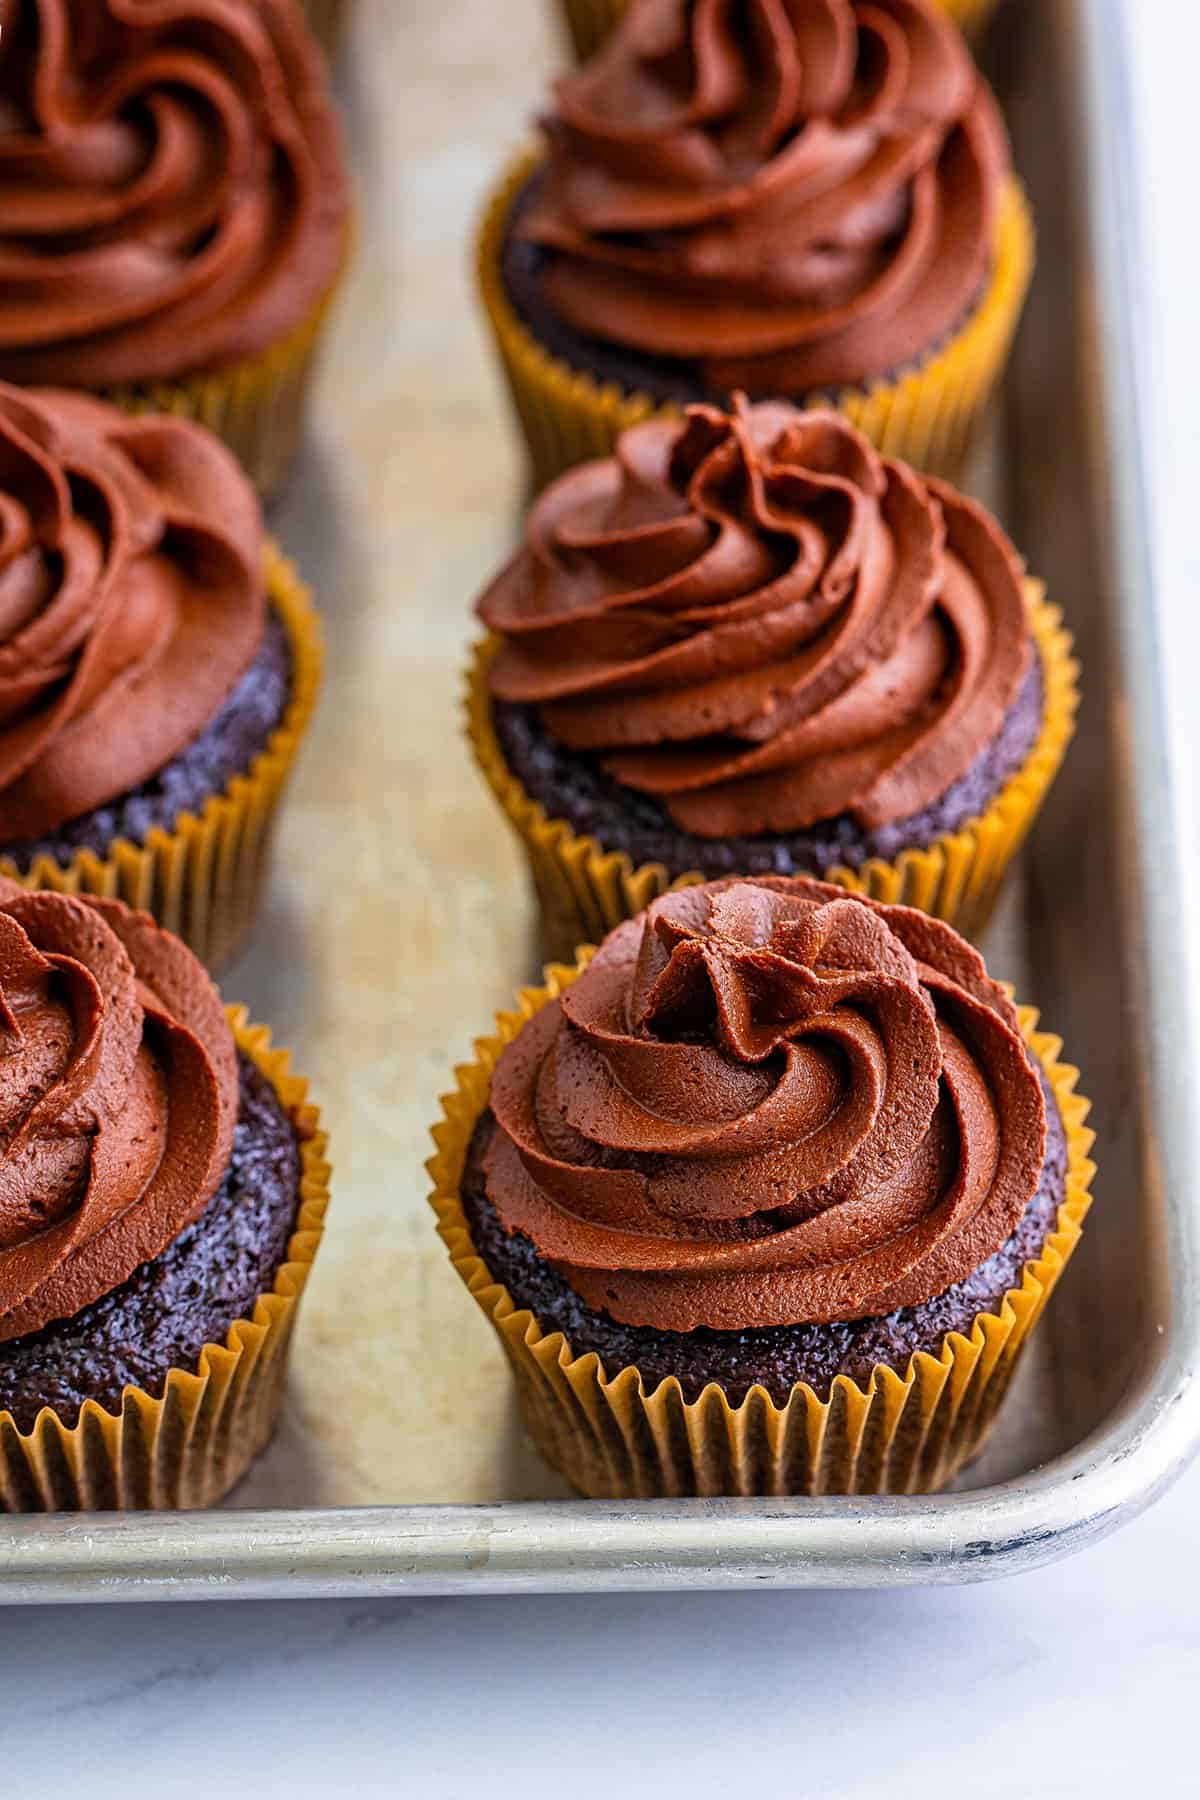 A tray of Baileys chocolate cupcakes with swirled chocolate frosting.